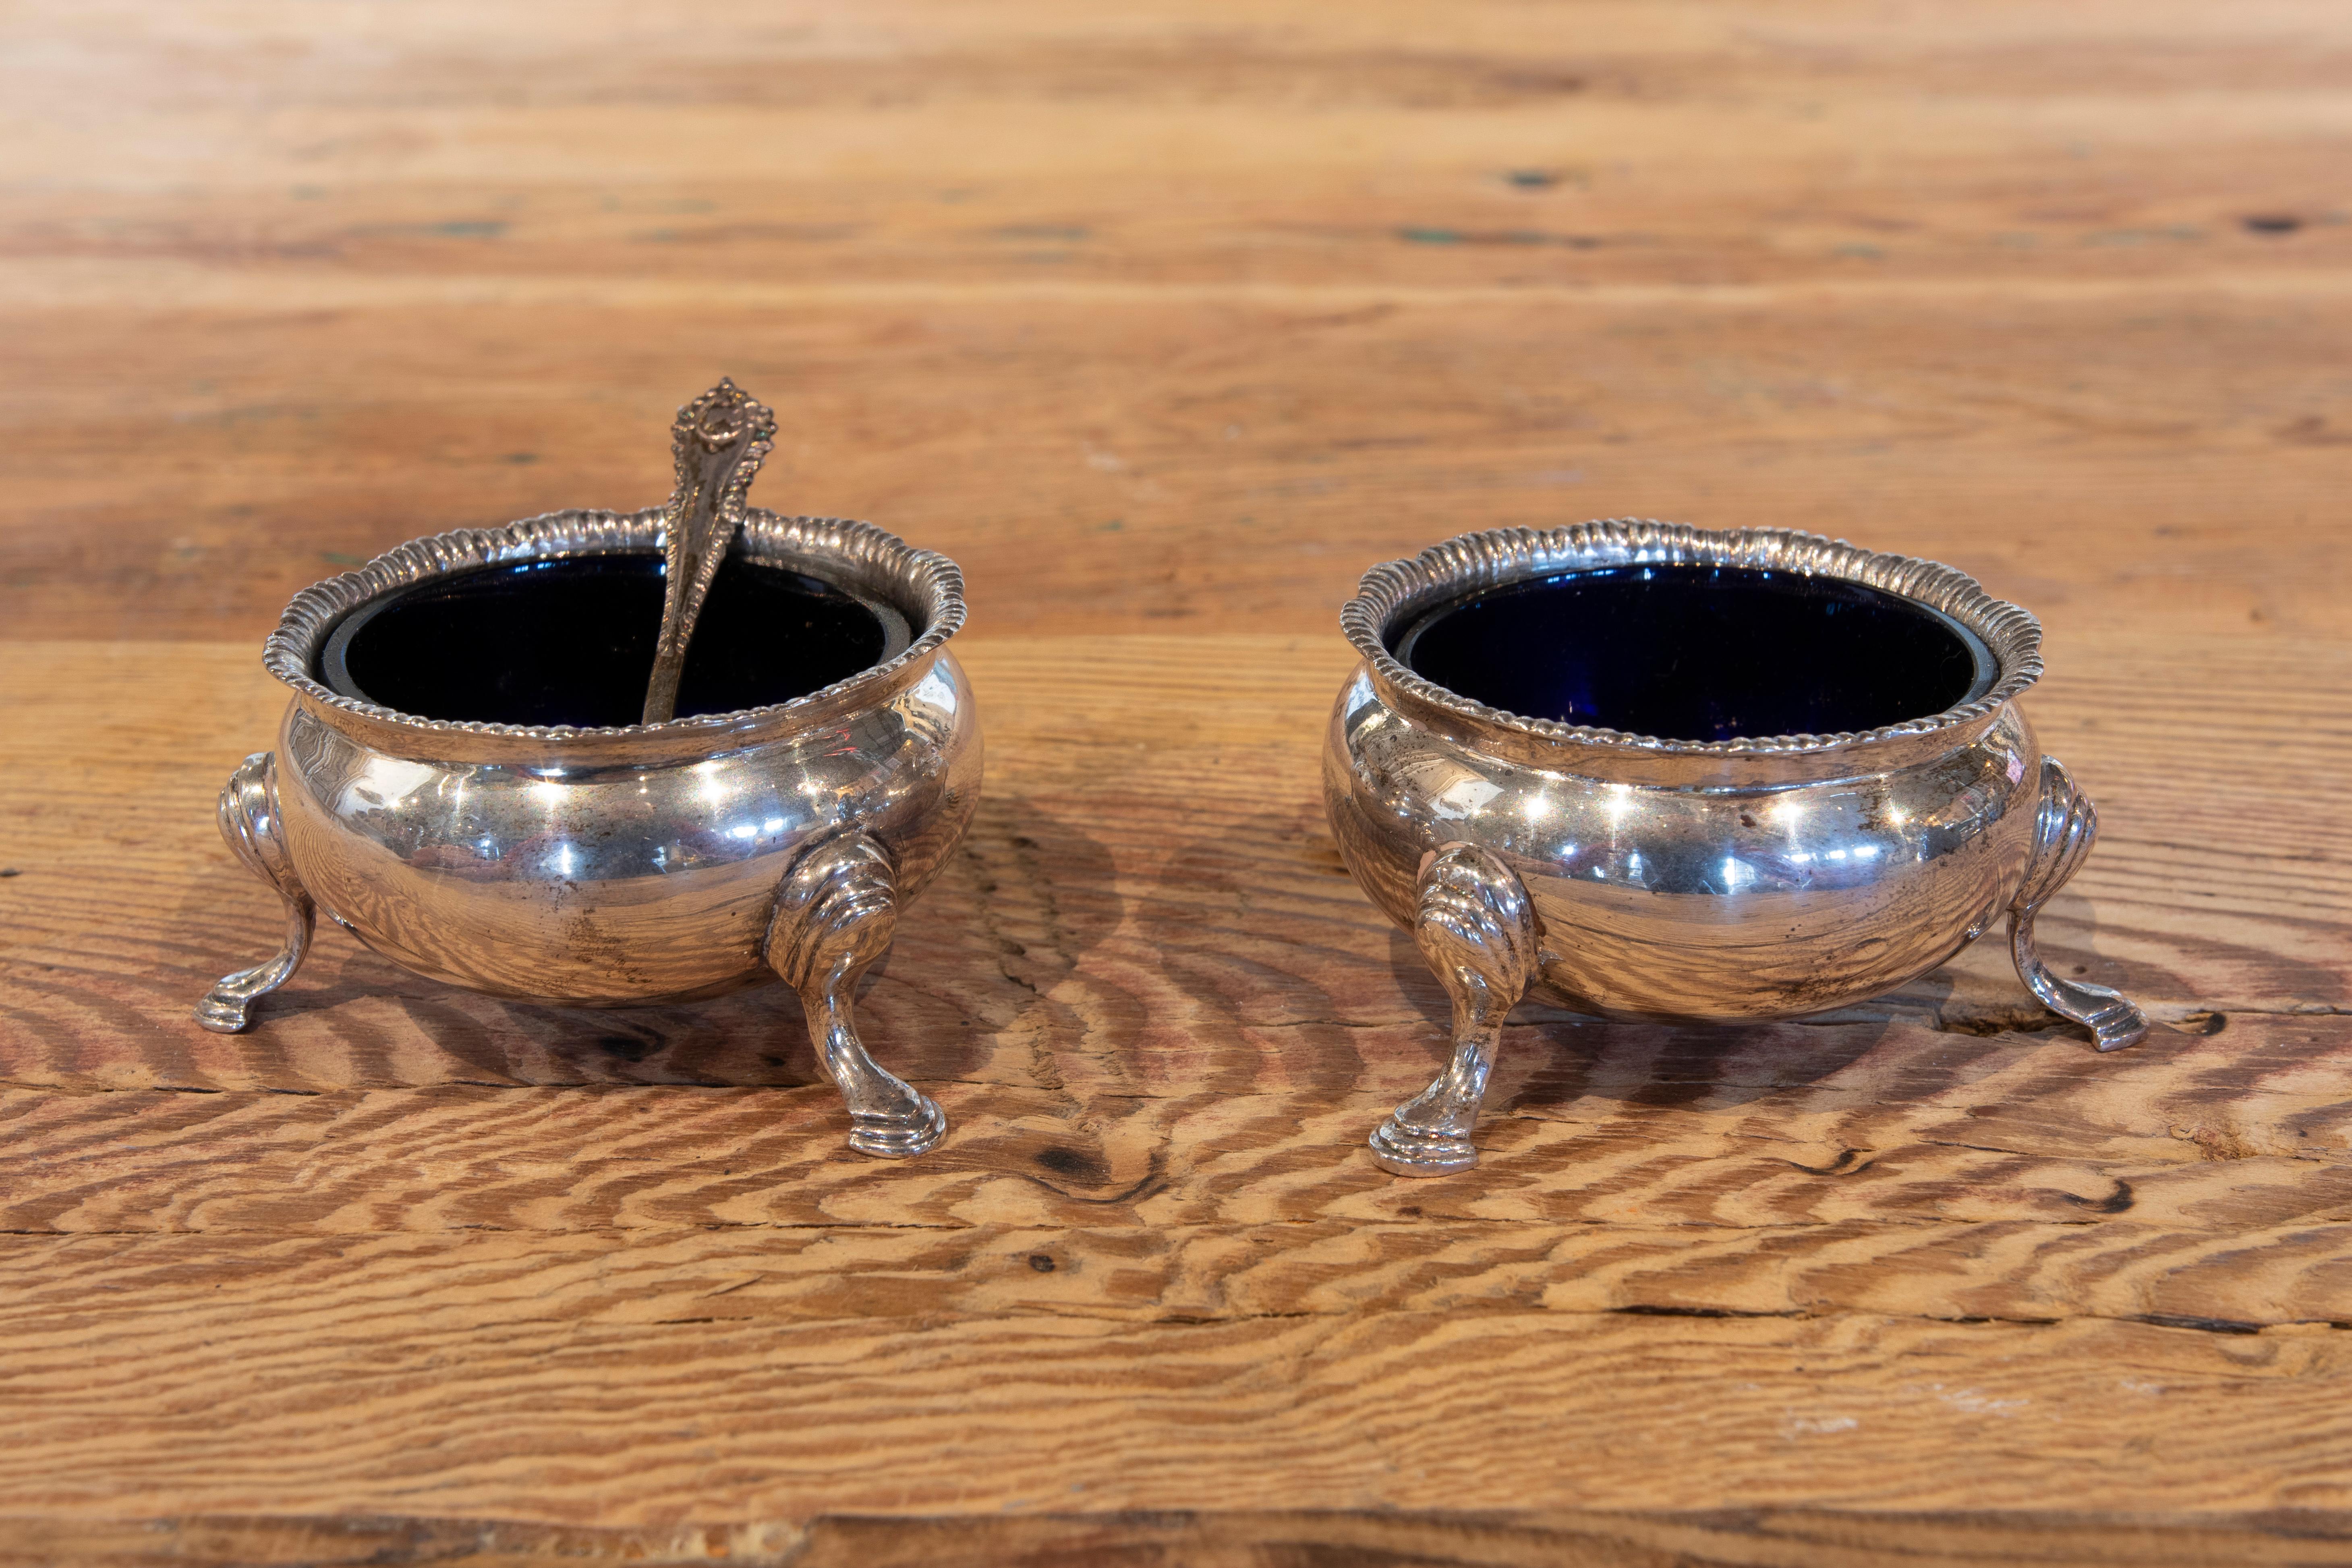 1970s English pair of silver and crystal salt cellars with Harrods Hallmarking
The spoon measures 7cm.